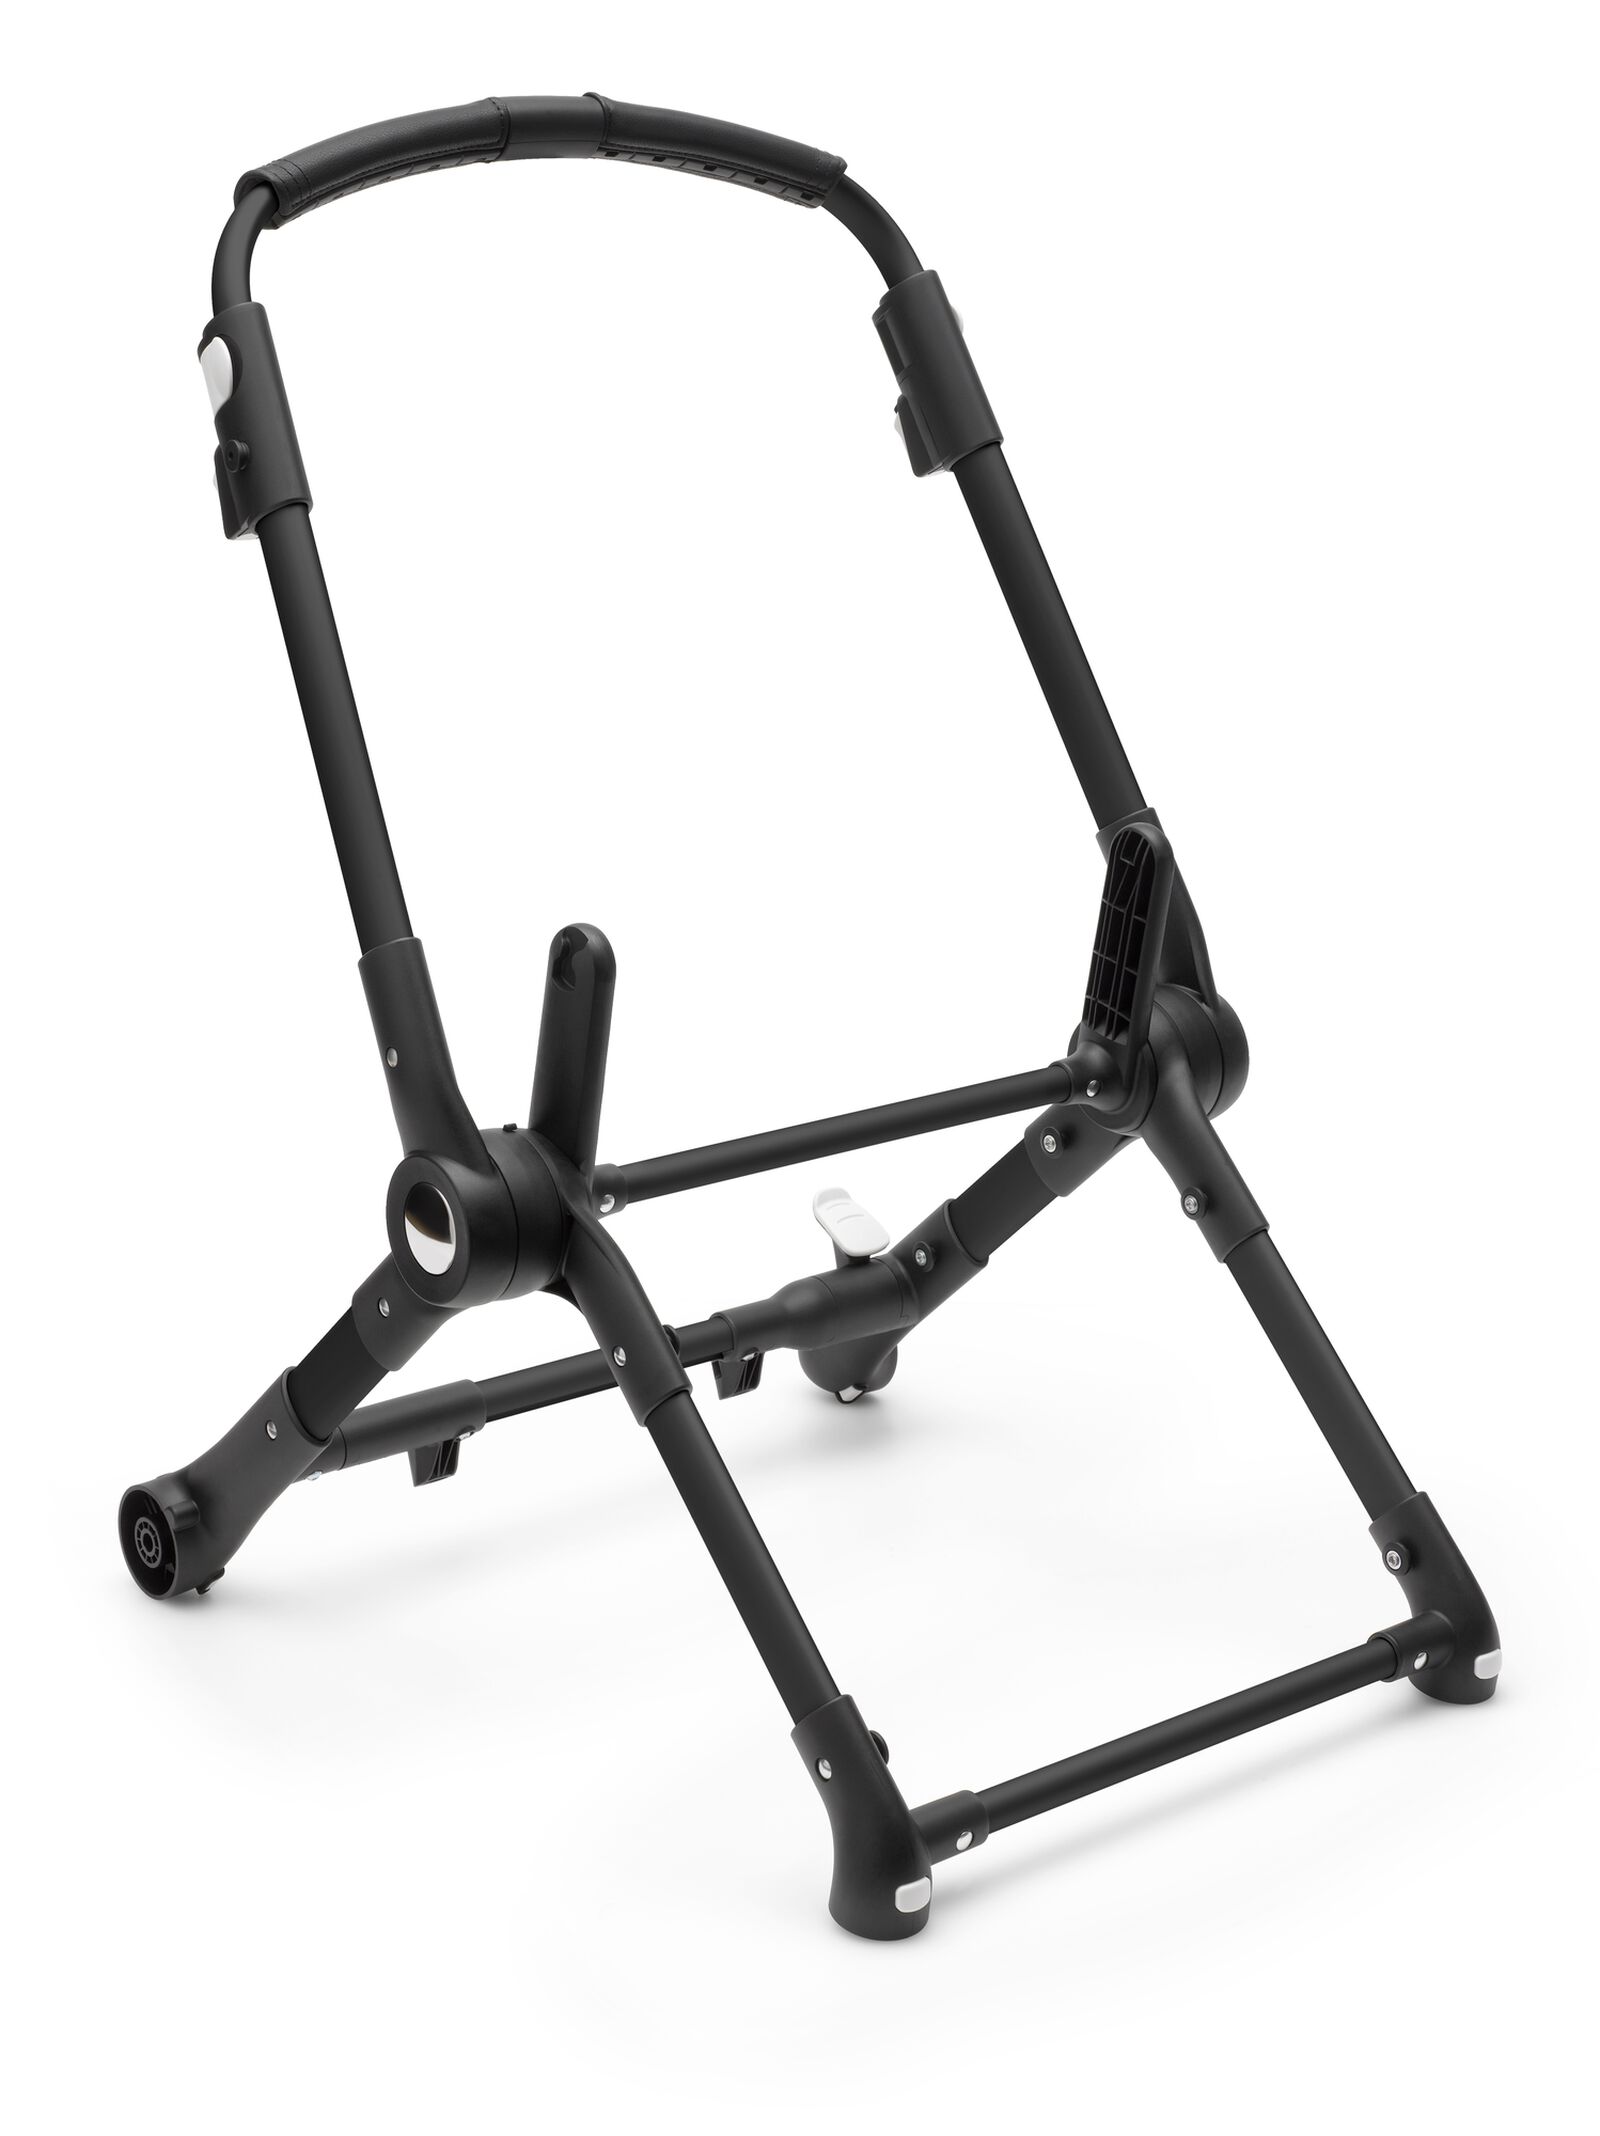 Bugaboo Lynx chassis - View 1